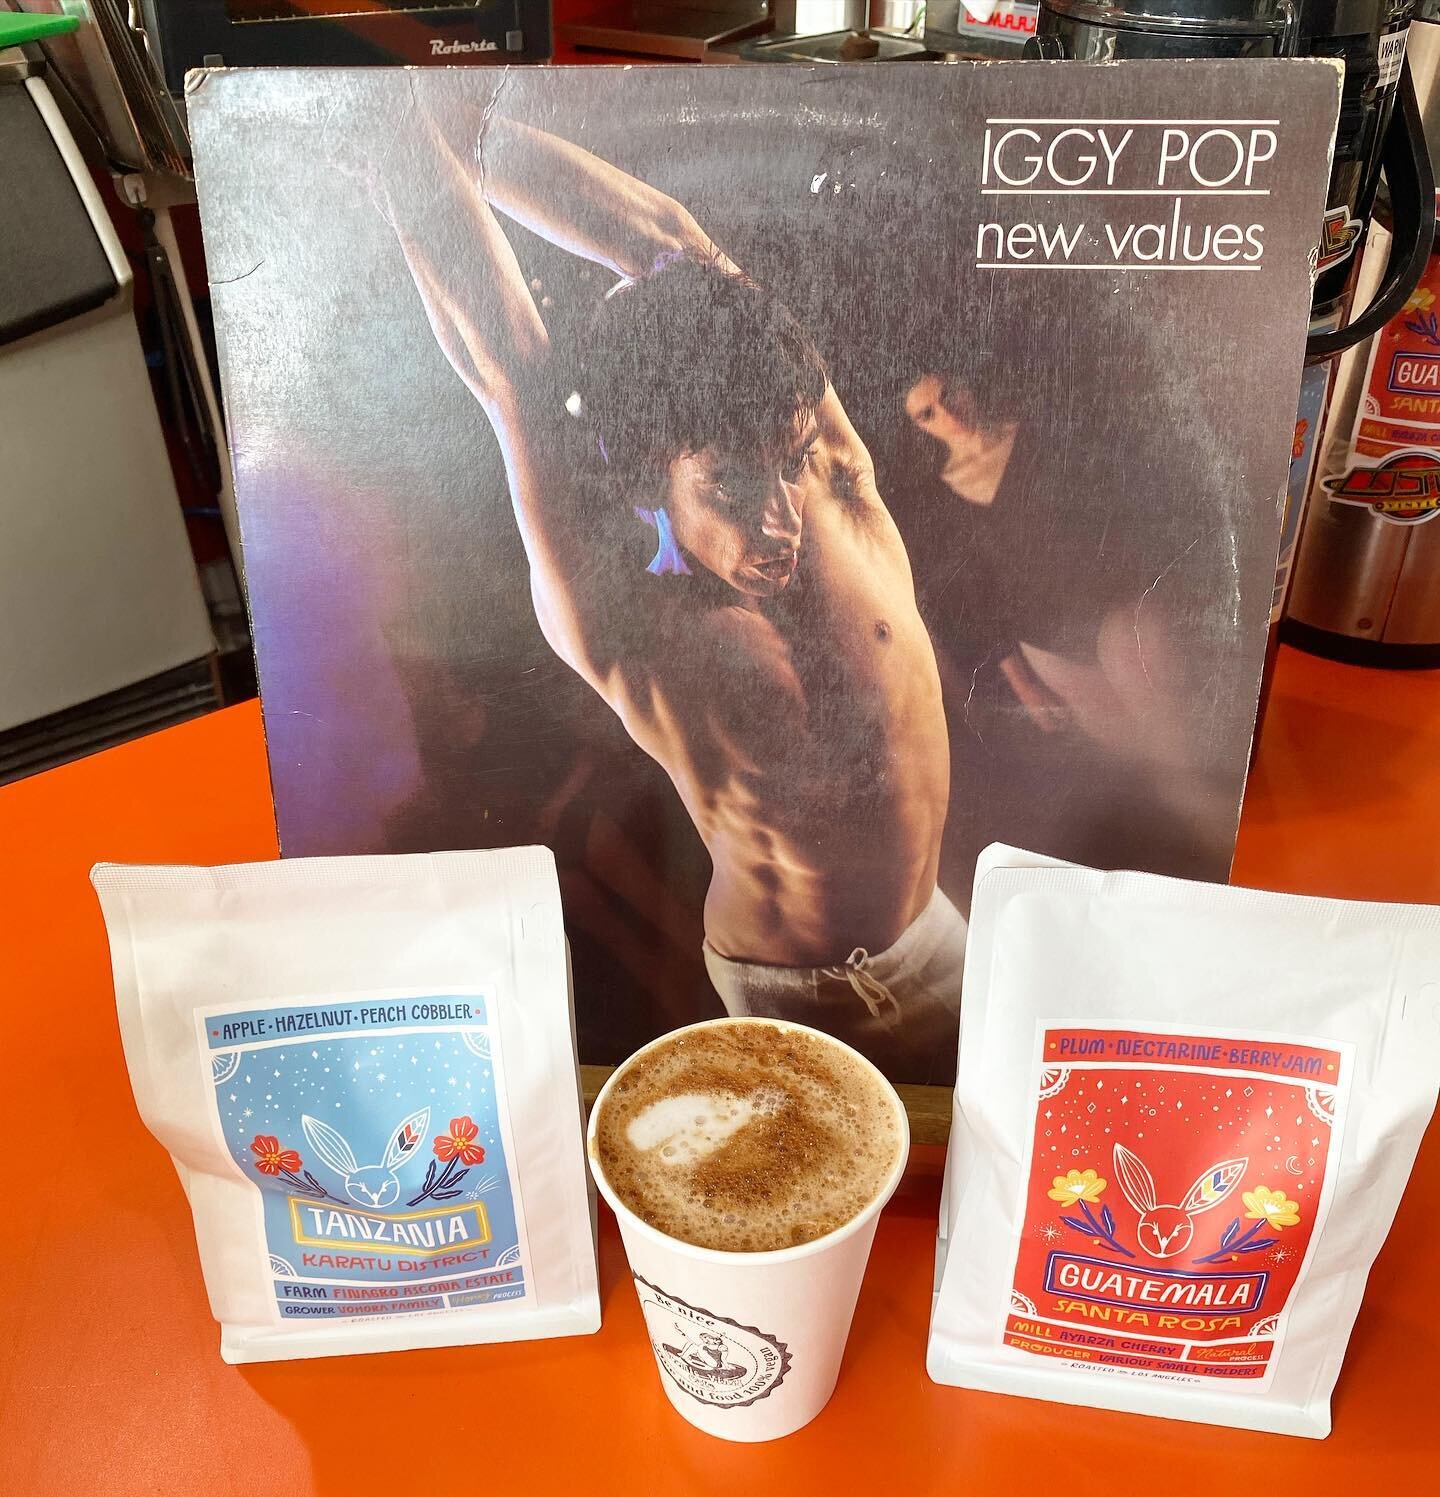 The sun's coming out! Come satiate your need for vegan hot chocolate and Iggy Pop